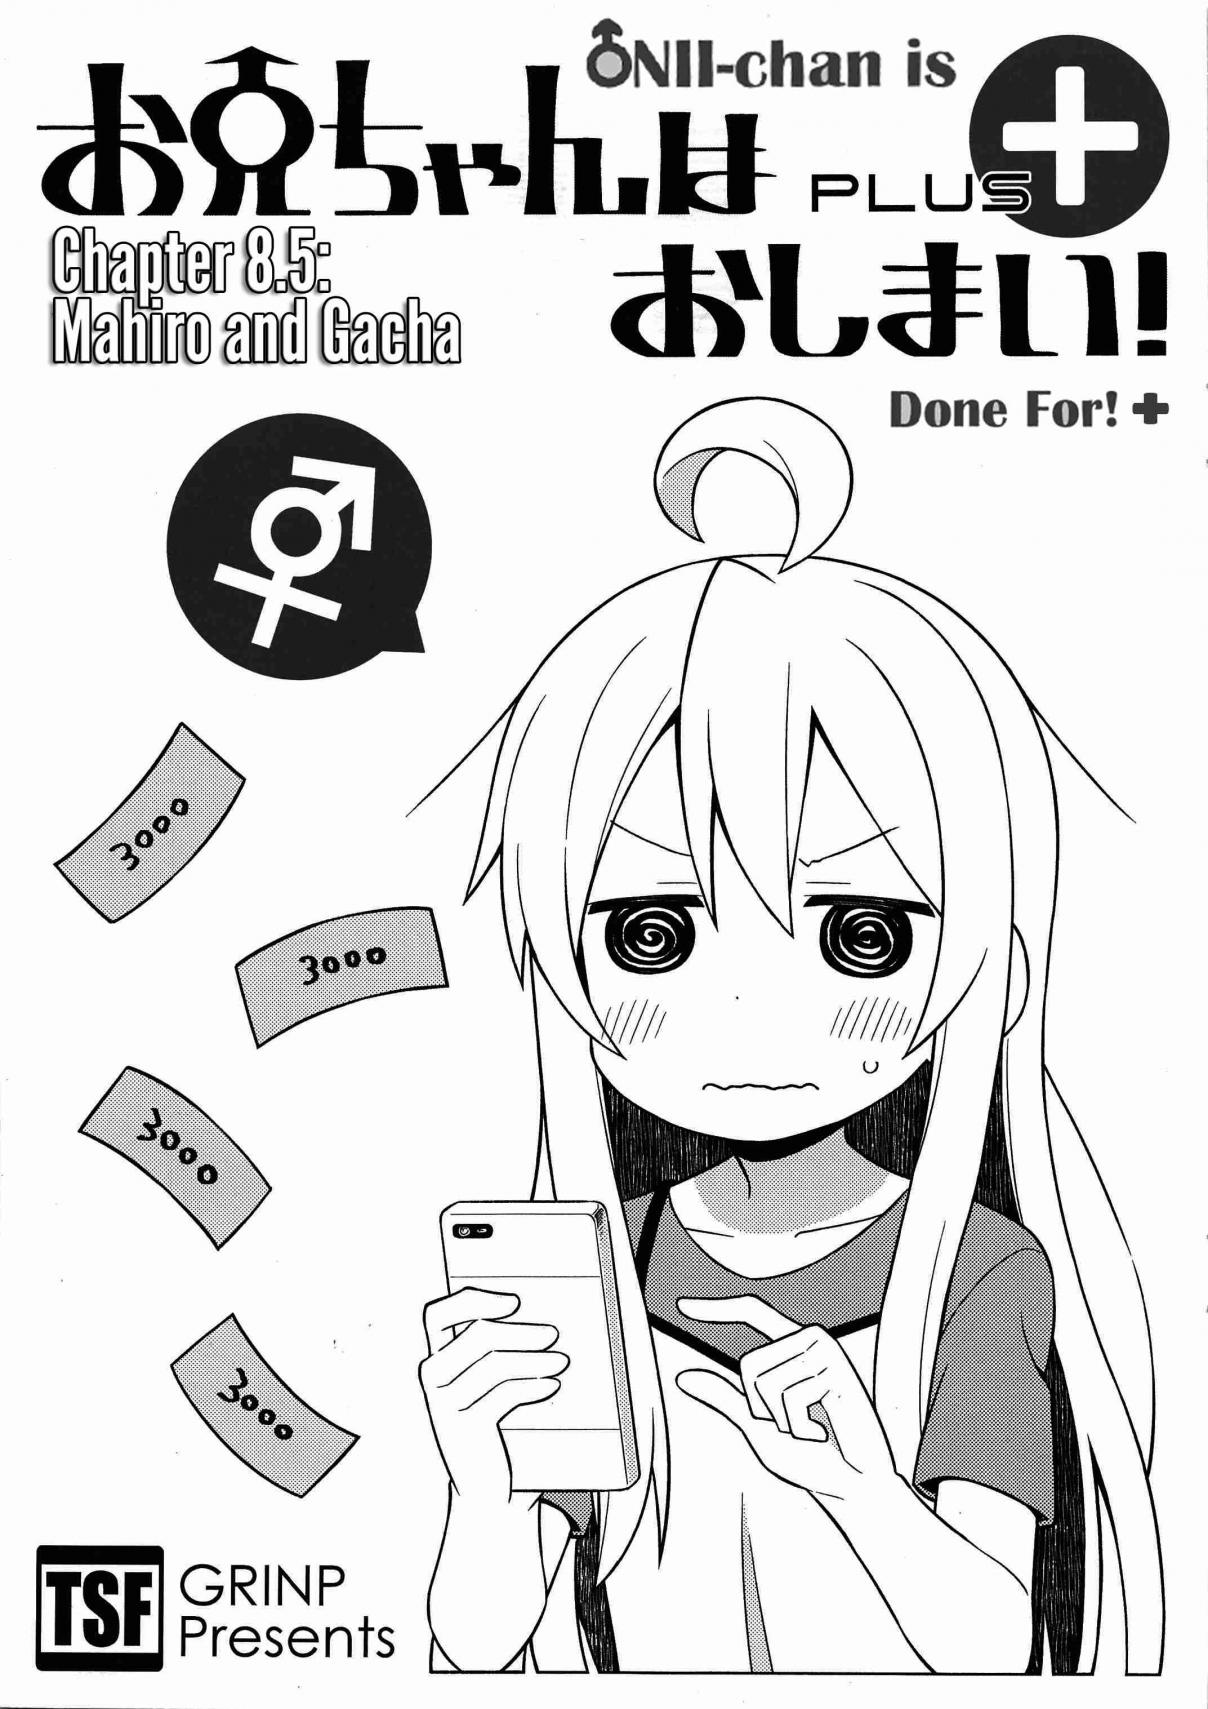 Onii chan is Done For! Vol. 1 Ch. 8.5 Mahiro and Gacha ()